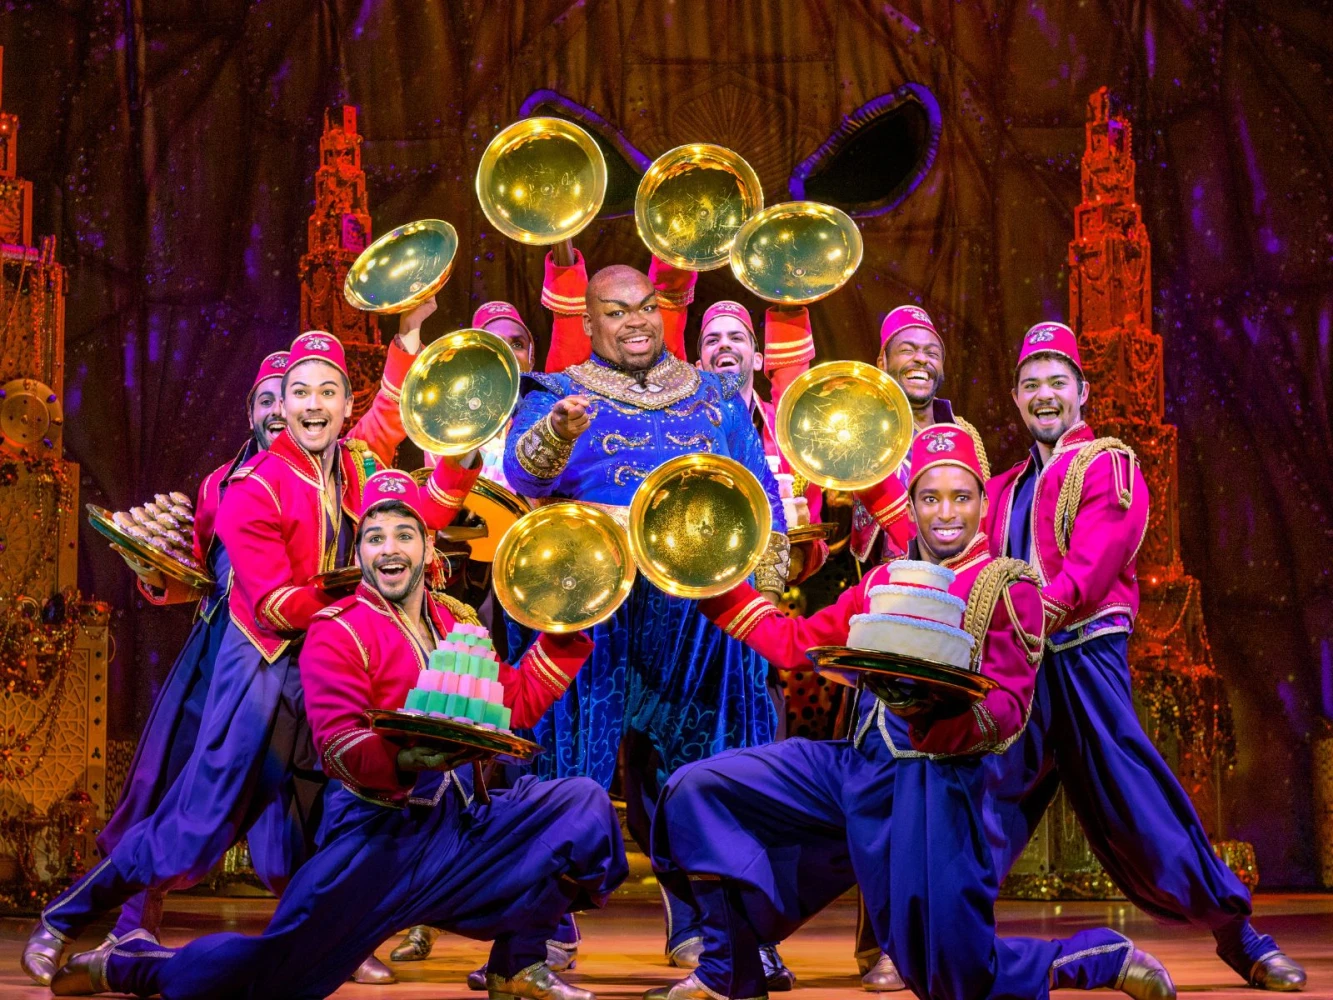 Disney's Aladdin at Segerstrom: What to expect - 3